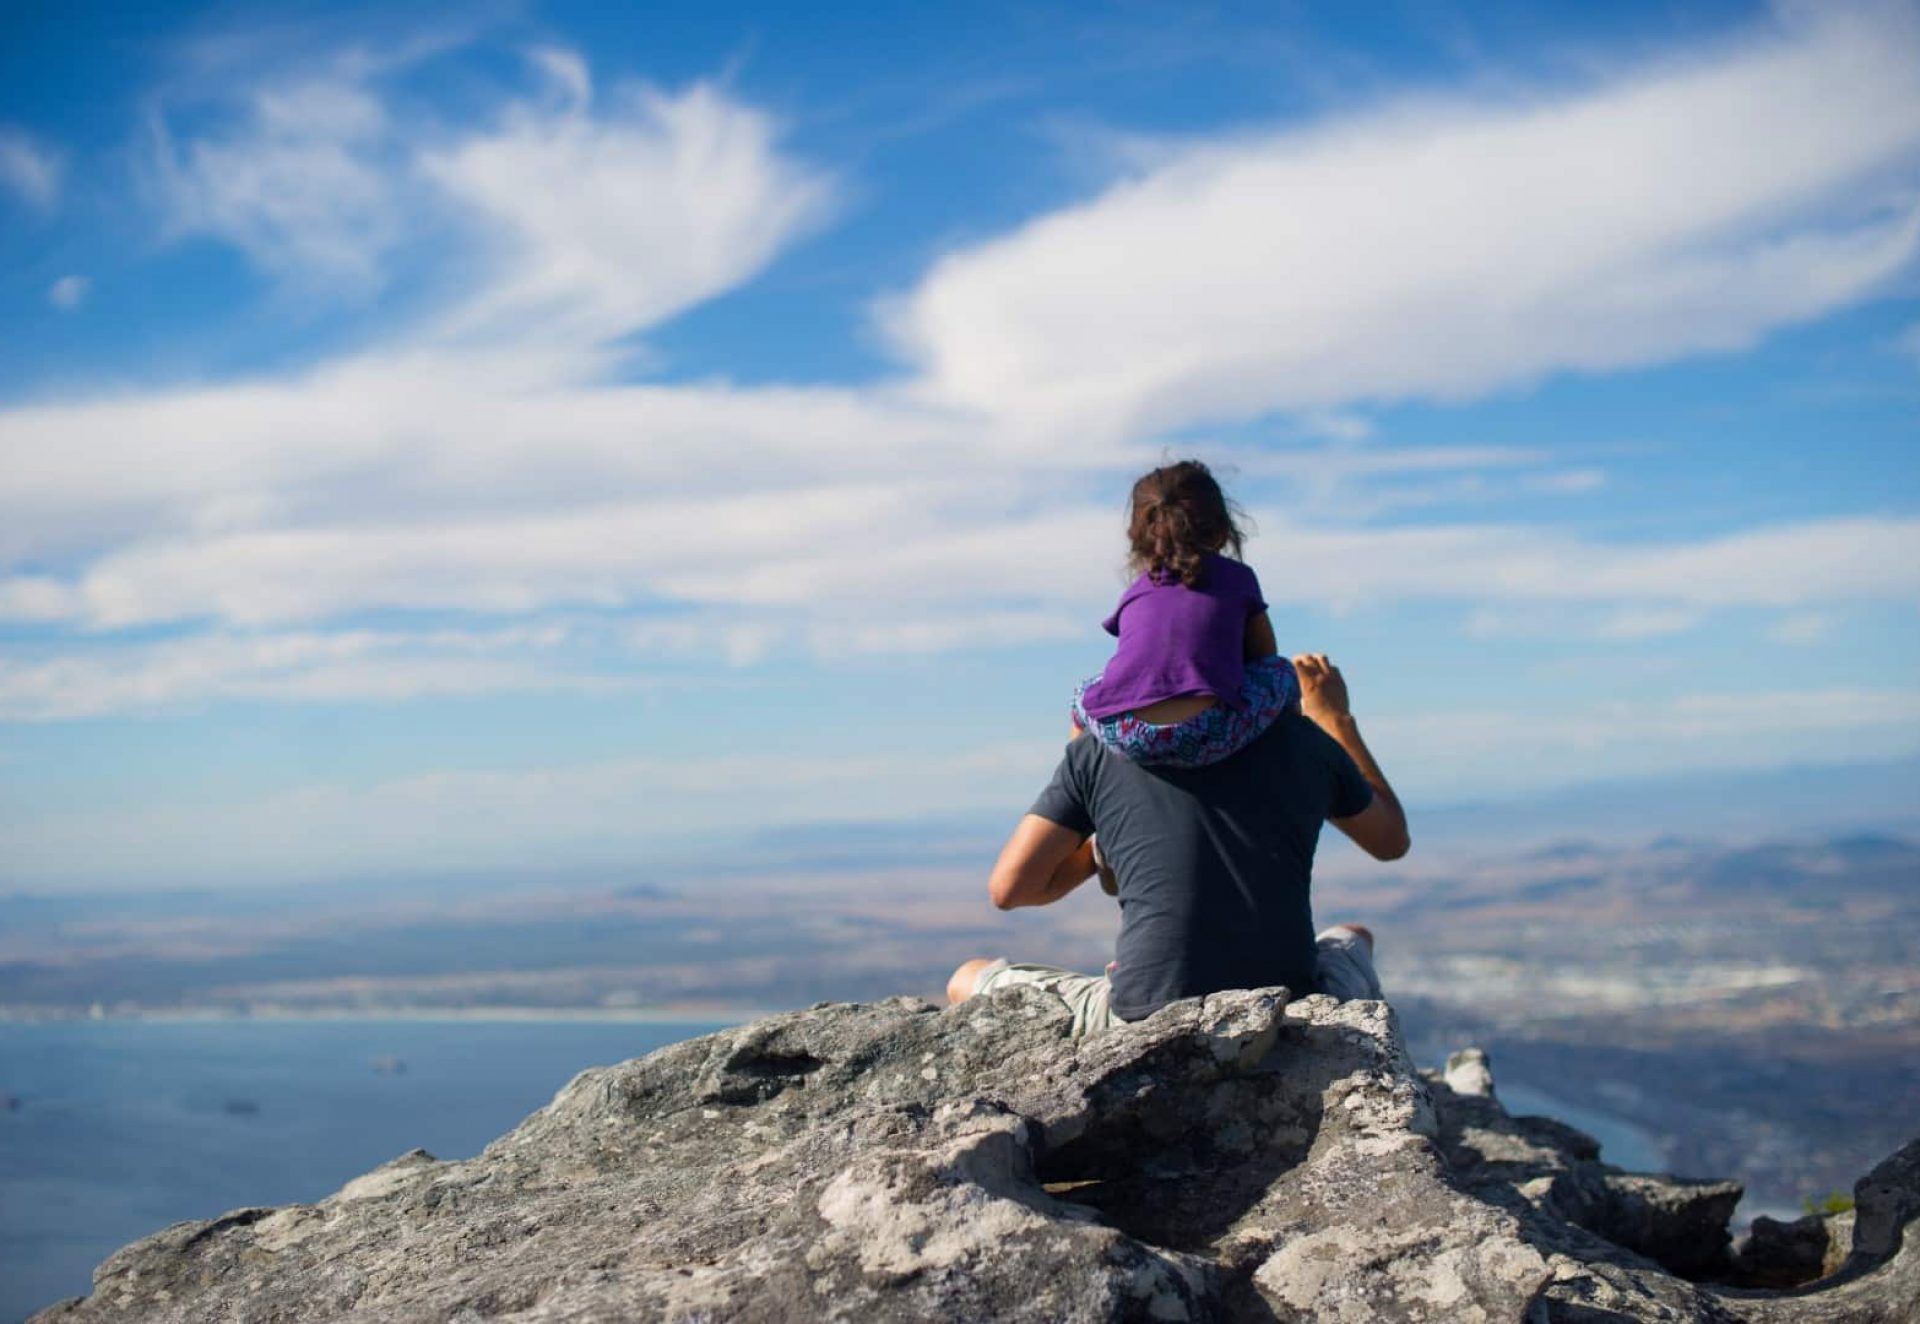 Man sitting on a rock carrying his daughter while they are both overlooking the city. The skies are bright blue and slightly cloudy.